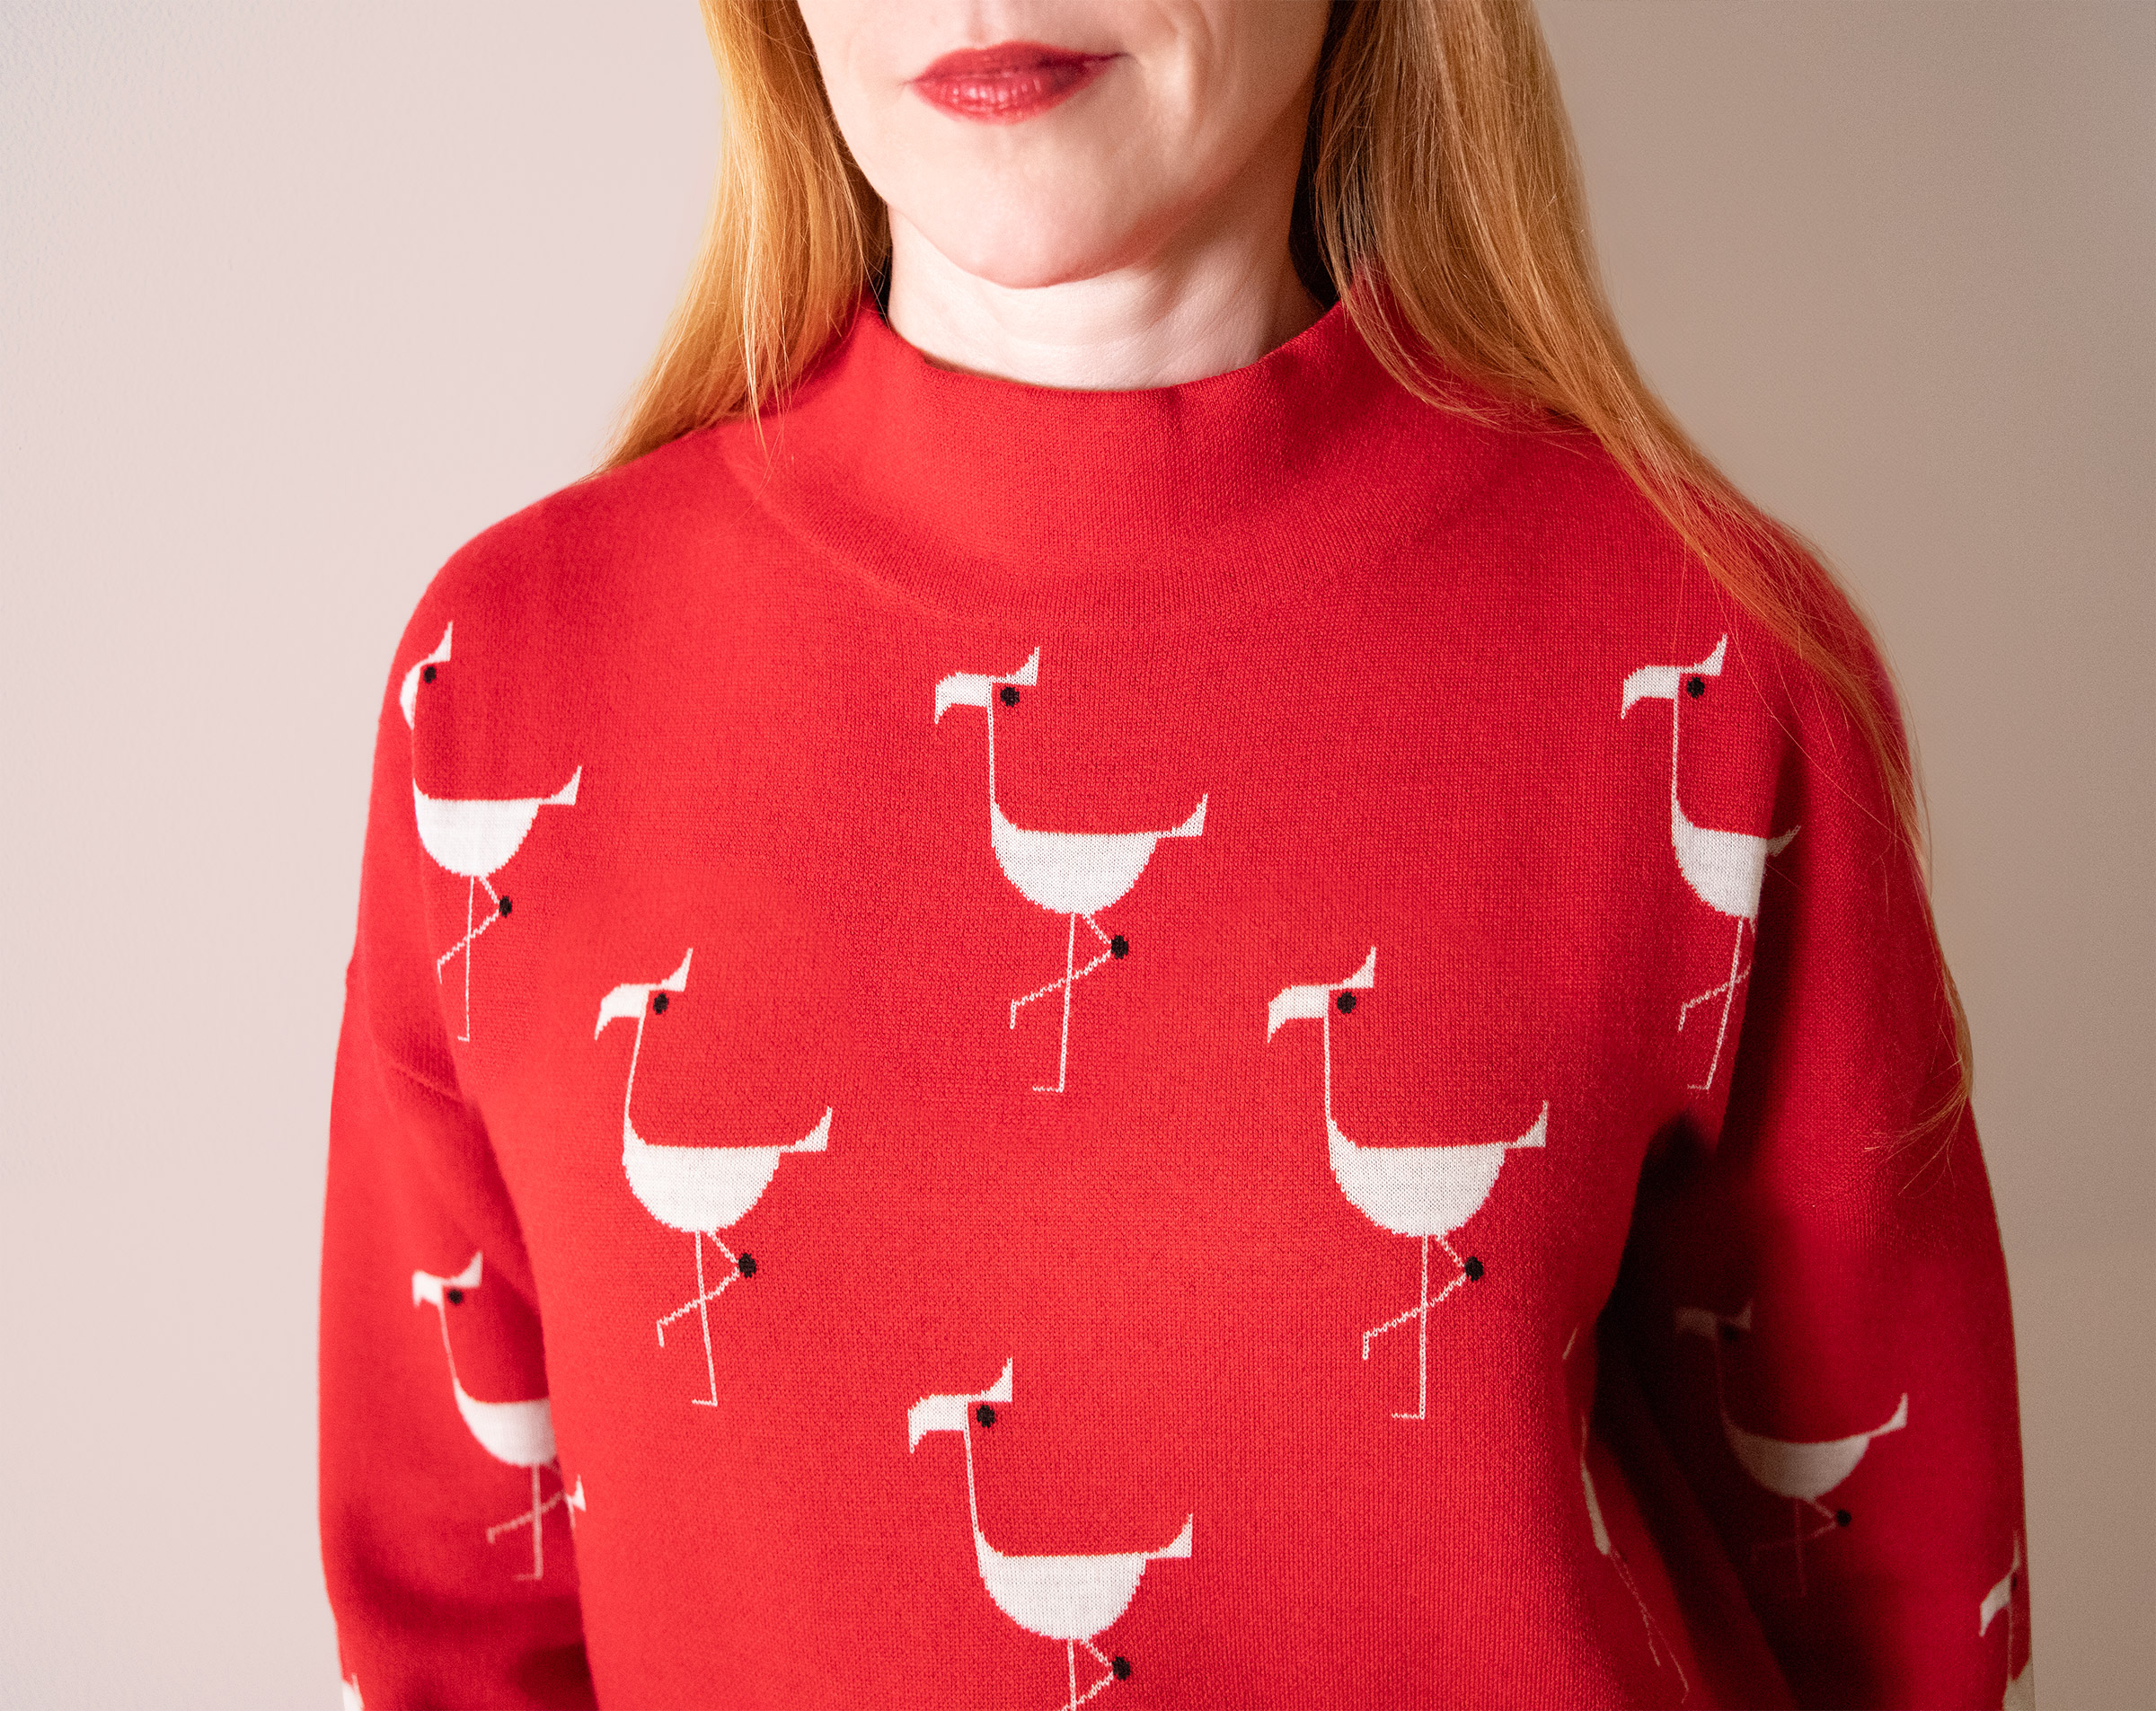 red haired woman with red lipstick wearing a red mock turtleneck sweater with white flamingos